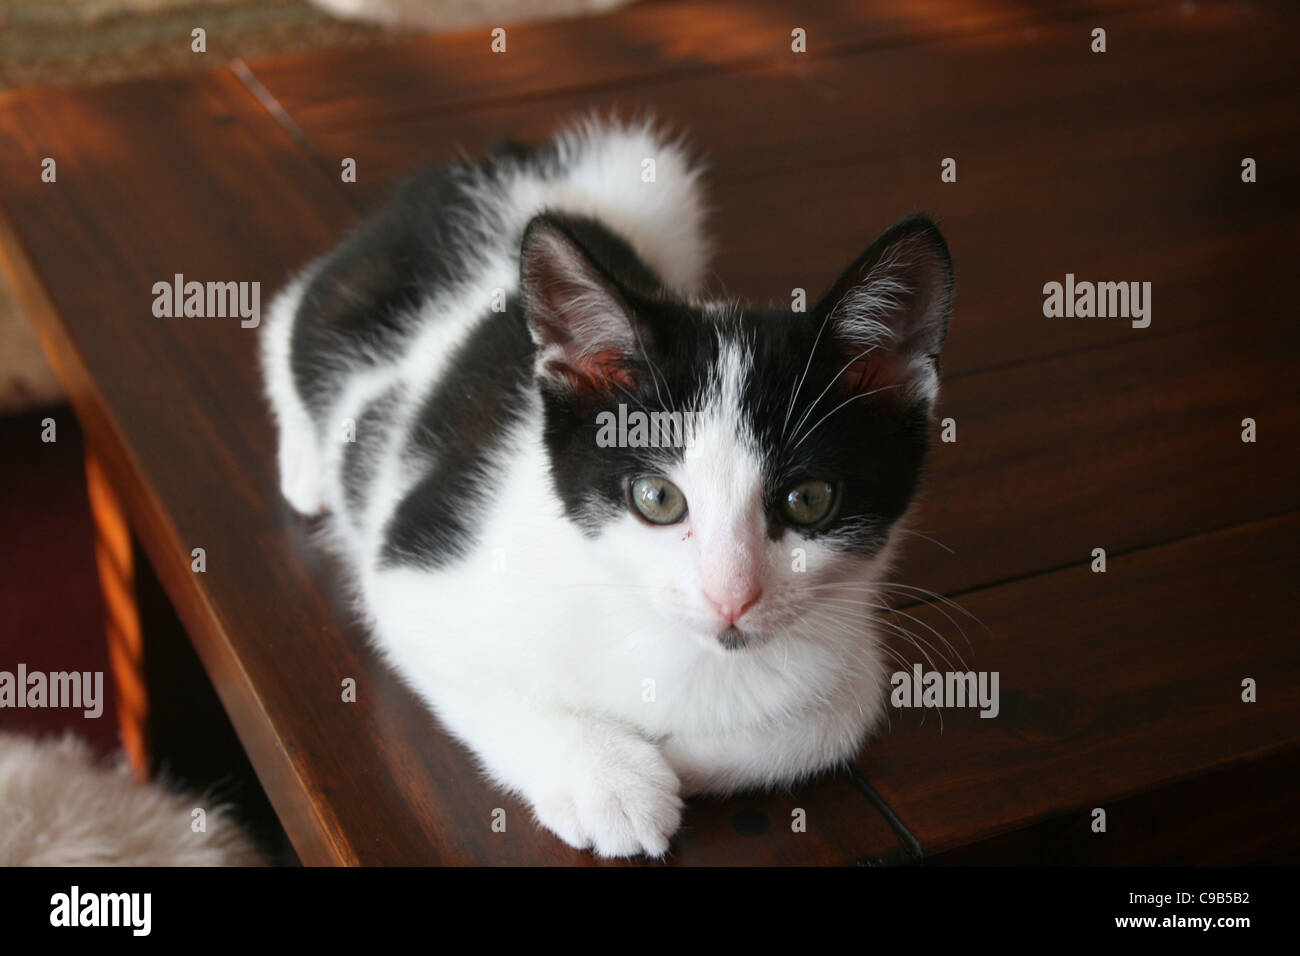 Black and white kitten cat sitting one front pawn tucked in on dark wood coffee table with sun light.. Stock Photo